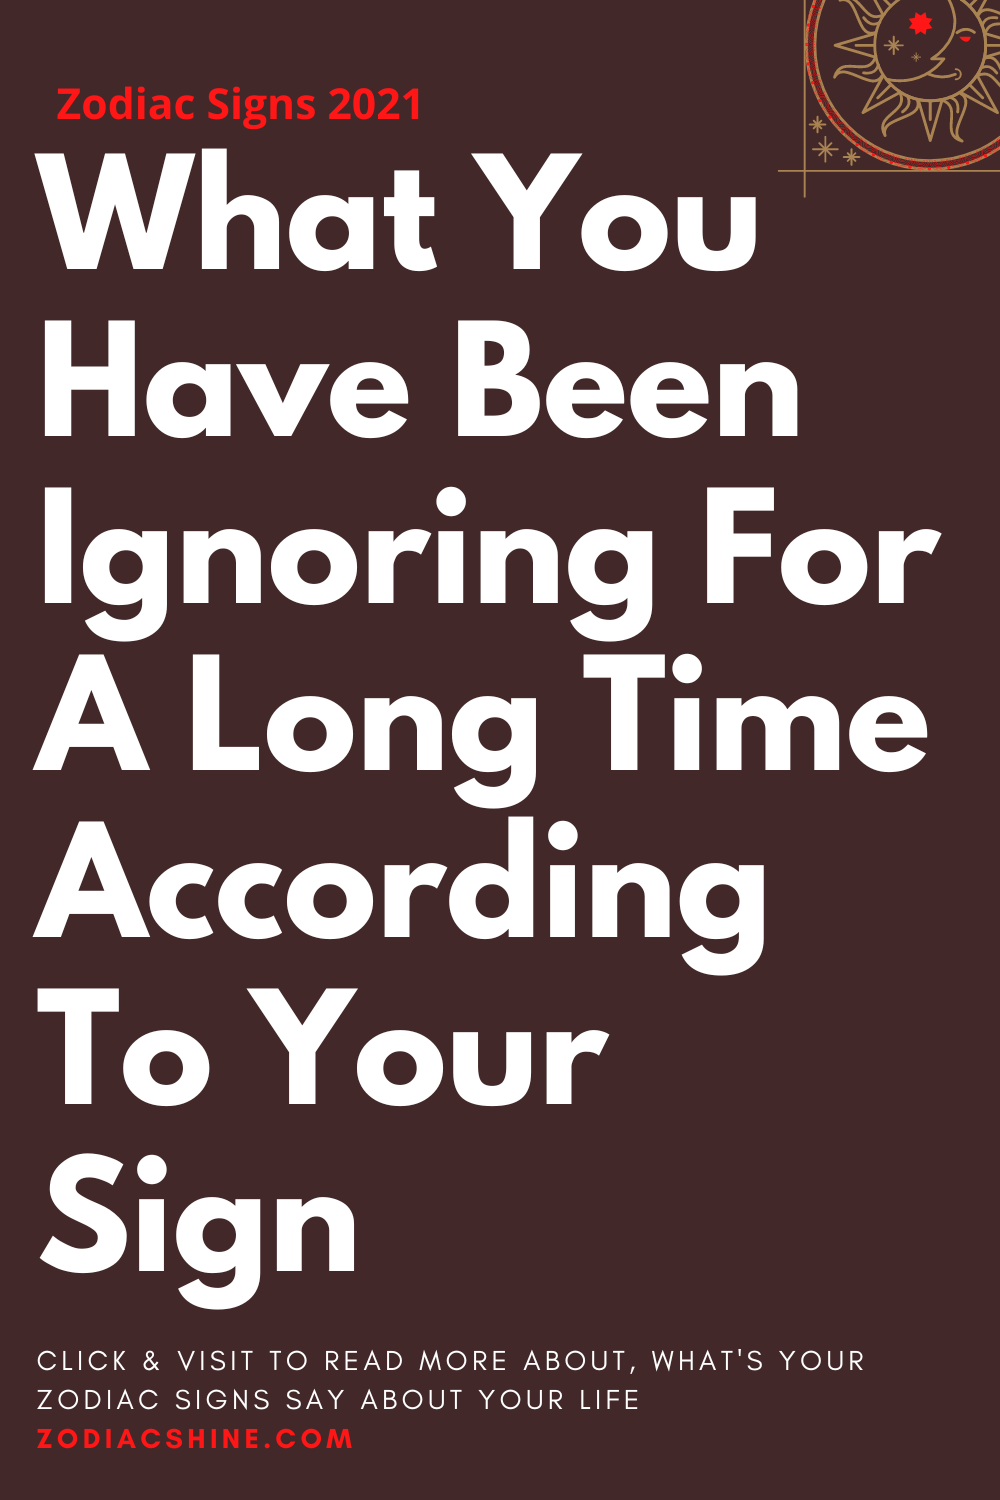 What You Have Been Ignoring For A Long Time According To Your Sign